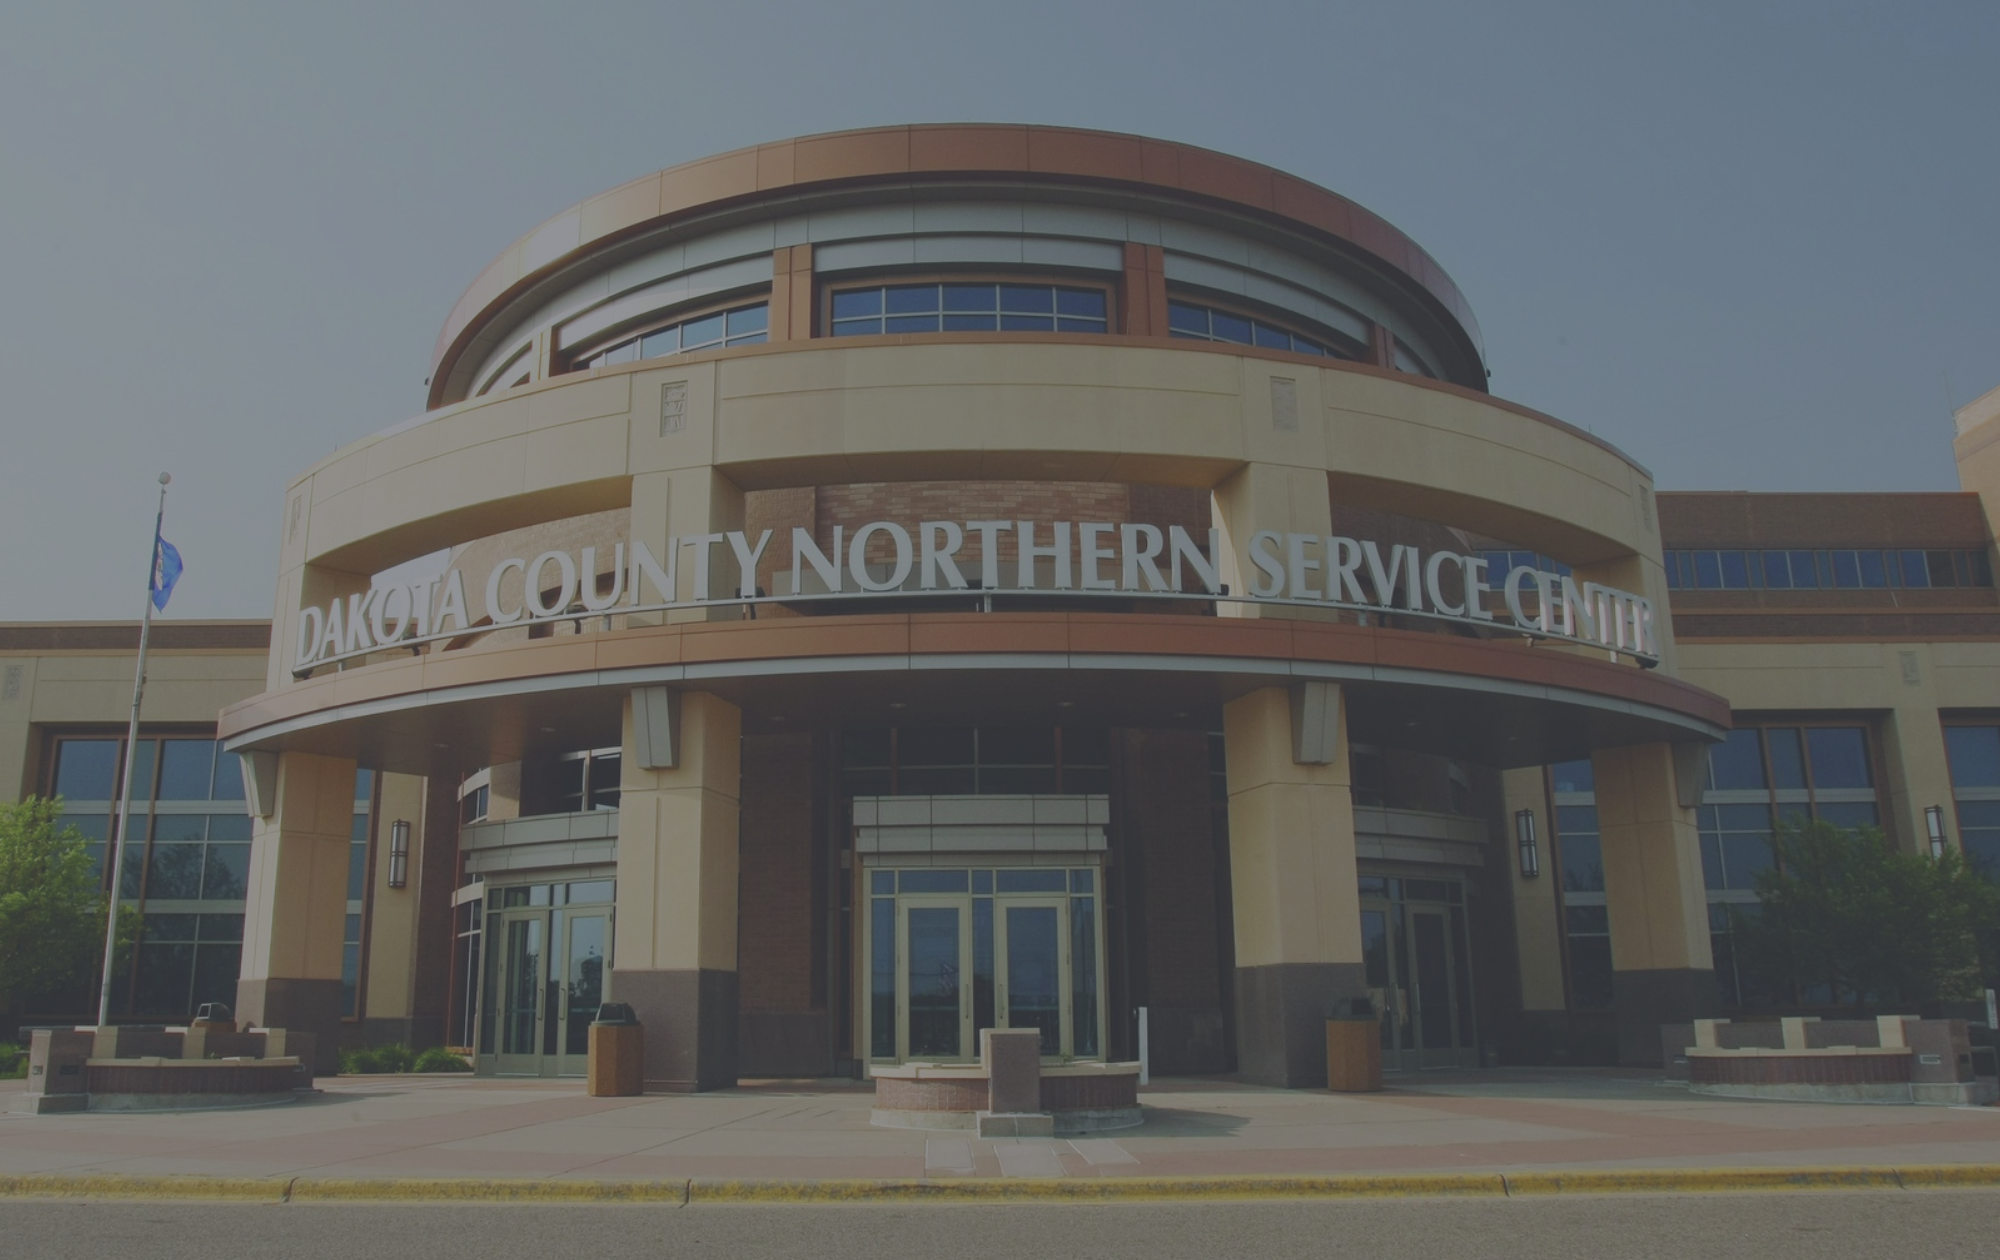 PIcture of Dakota County's Northern Service Center in West St. Paul.